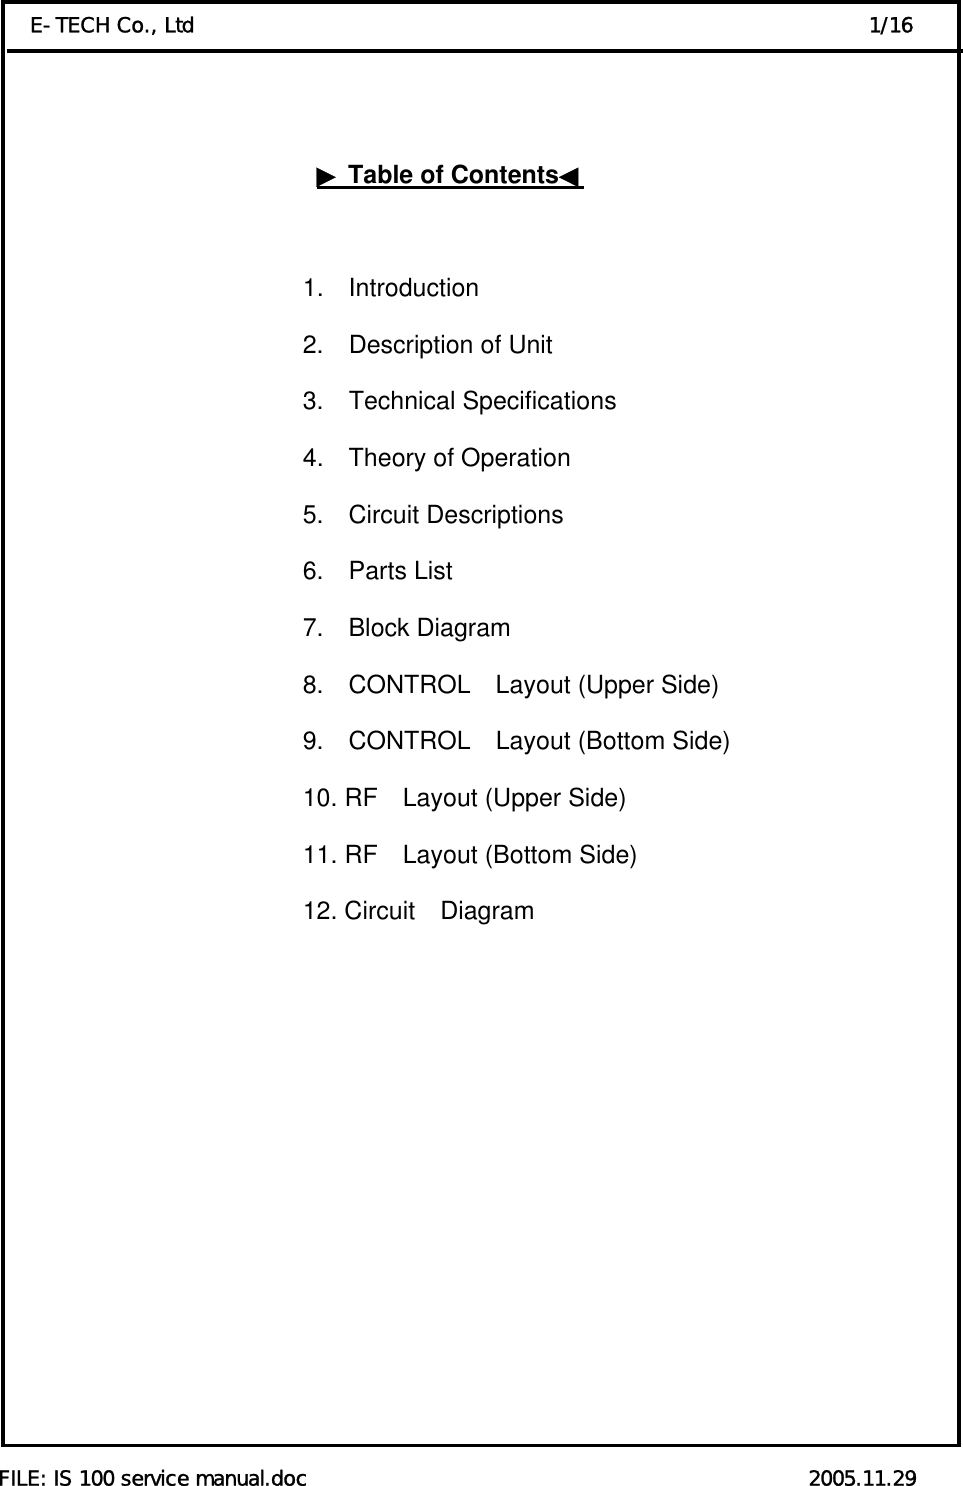  FILE: IS 100 service manual.doc                                                 2005.11.29 E-TECH Co., Ltd                                                                  1/16    ▶Table of Contents◀                            1.  Introduction                                          2.  Description of Unit                                          3.  Technical Specifications                                           4.  Theory of Operation 5.  Circuit Descriptions    6.  Parts List 7.  Block Diagram 8.  CONTROL  Layout (Upper Side) 9.  CONTROL  Layout (Bottom Side) 10. RF    Layout (Upper Side) 11. RF    Layout (Bottom Side) 12. Circuit  Diagram          